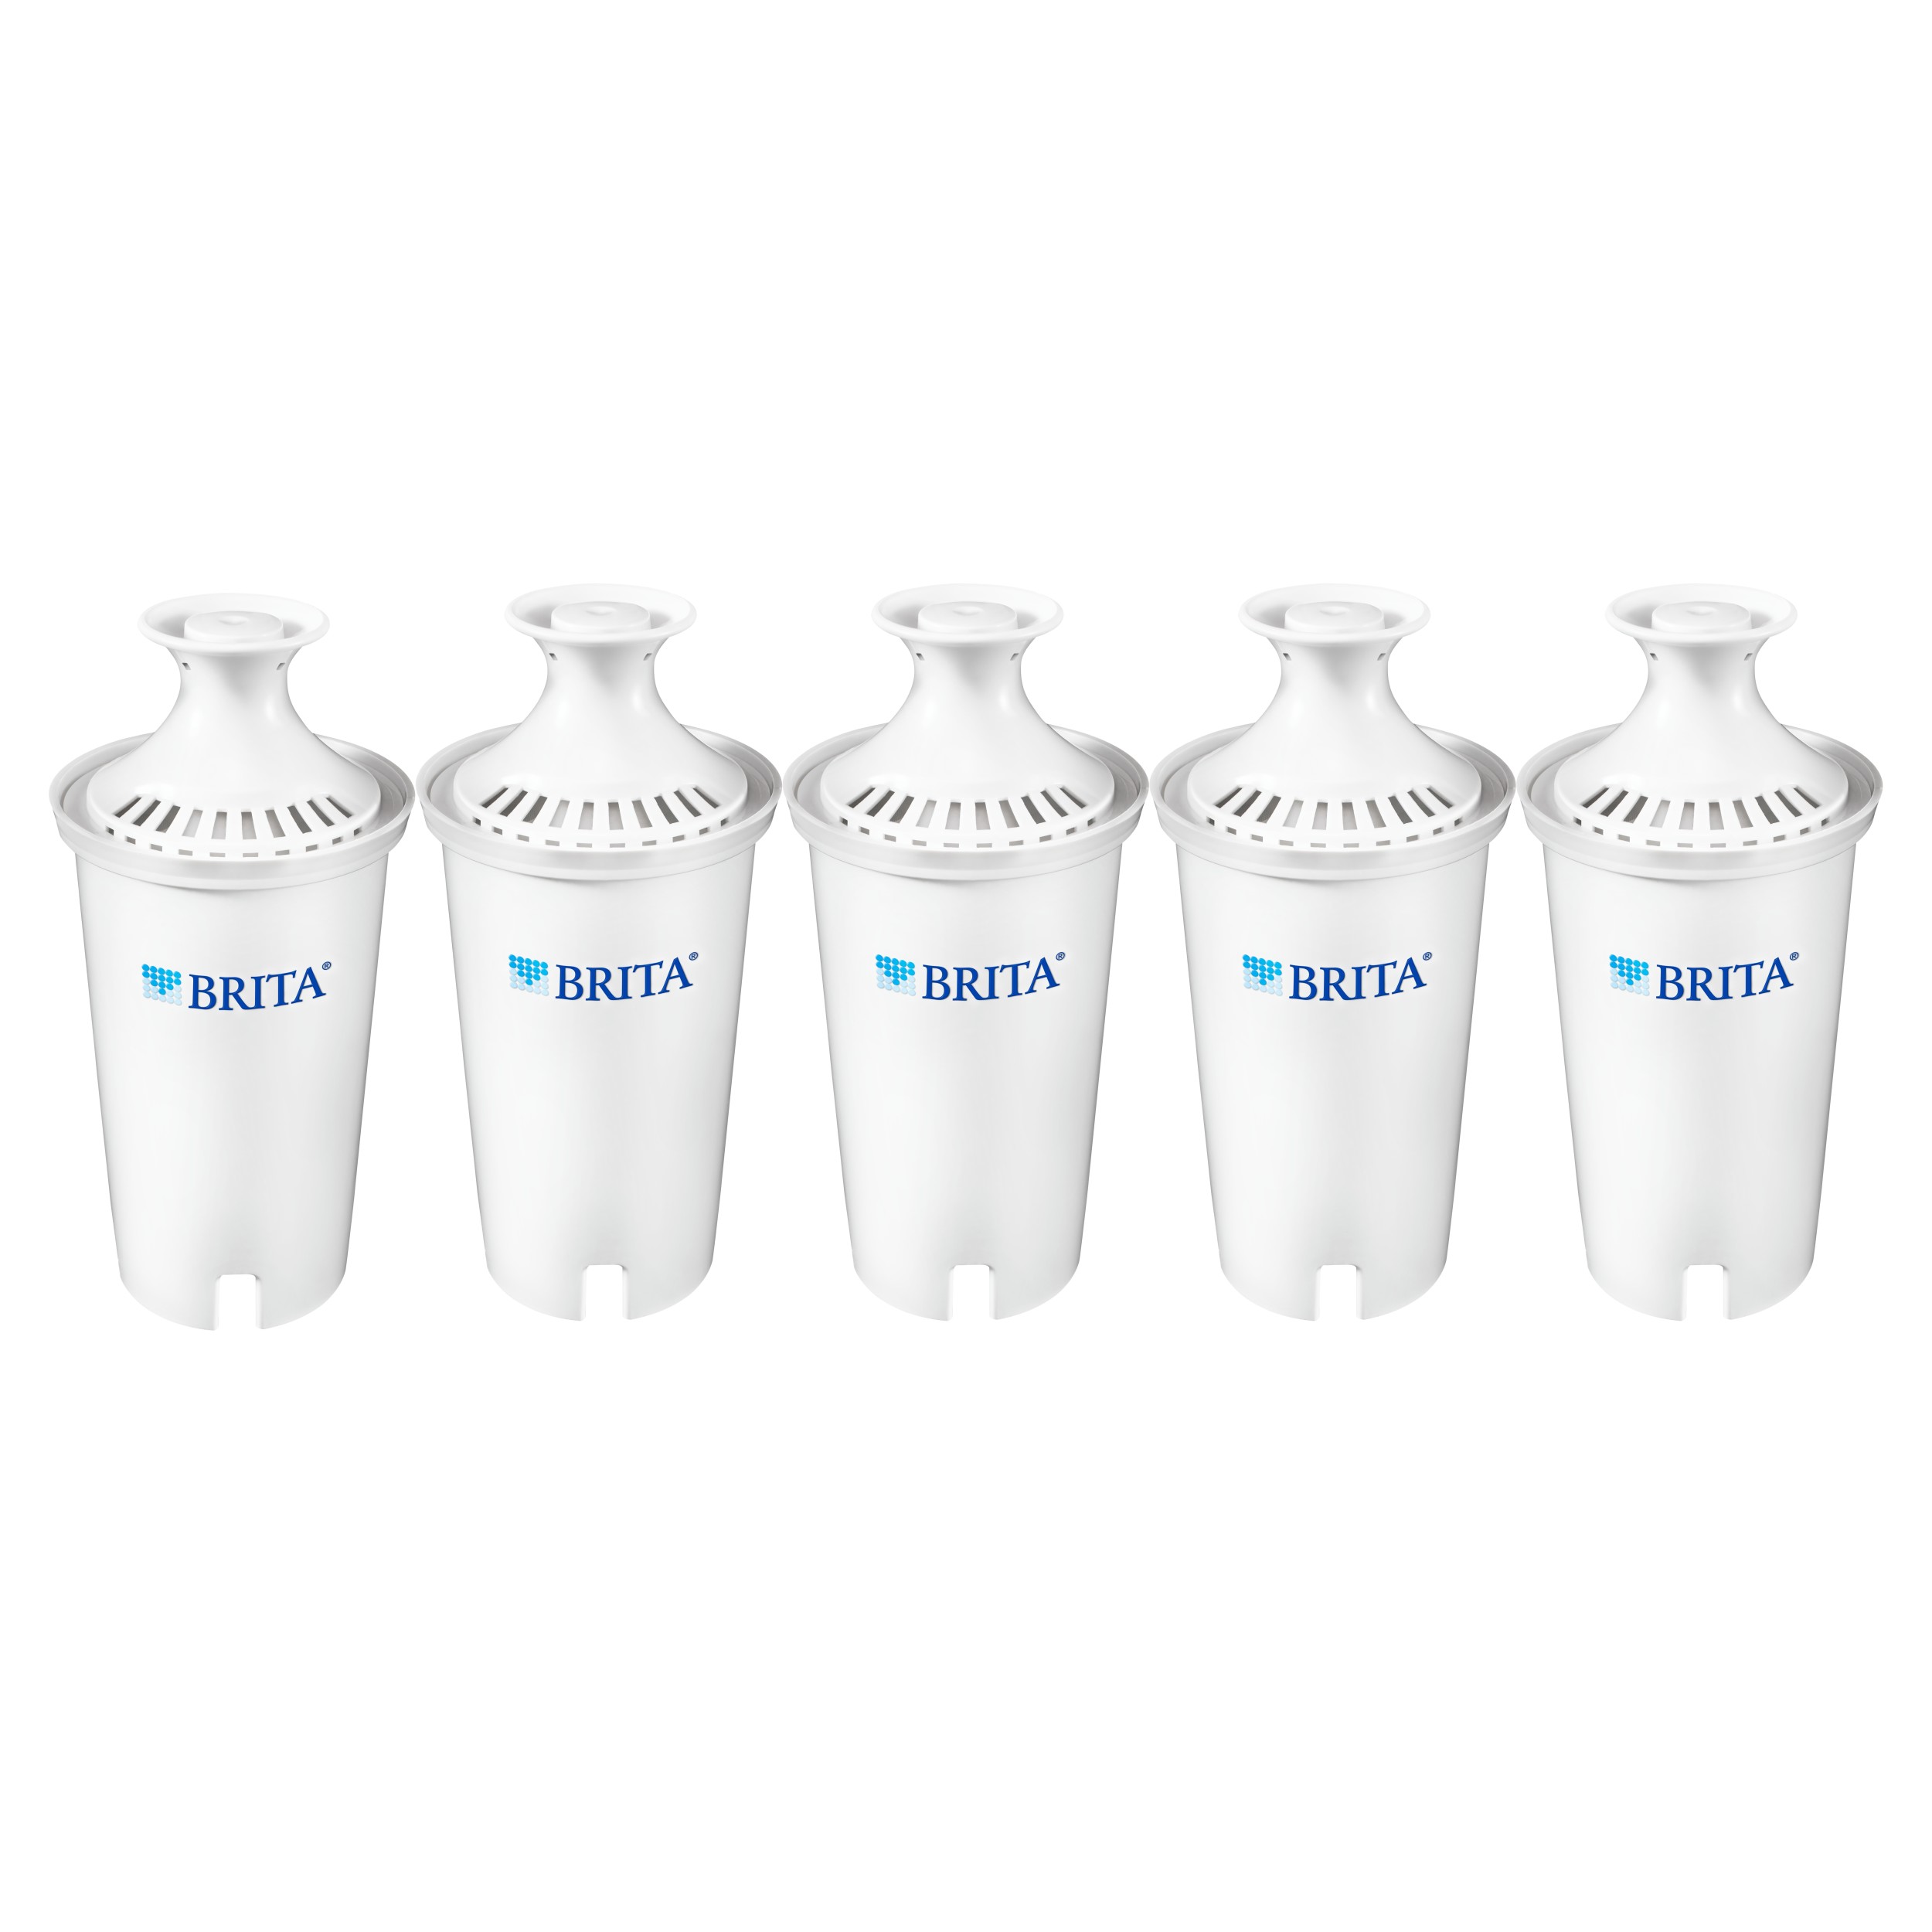 Brita Standard Water Filter Replacements, BPA Free, 5 Count - image 1 of 7